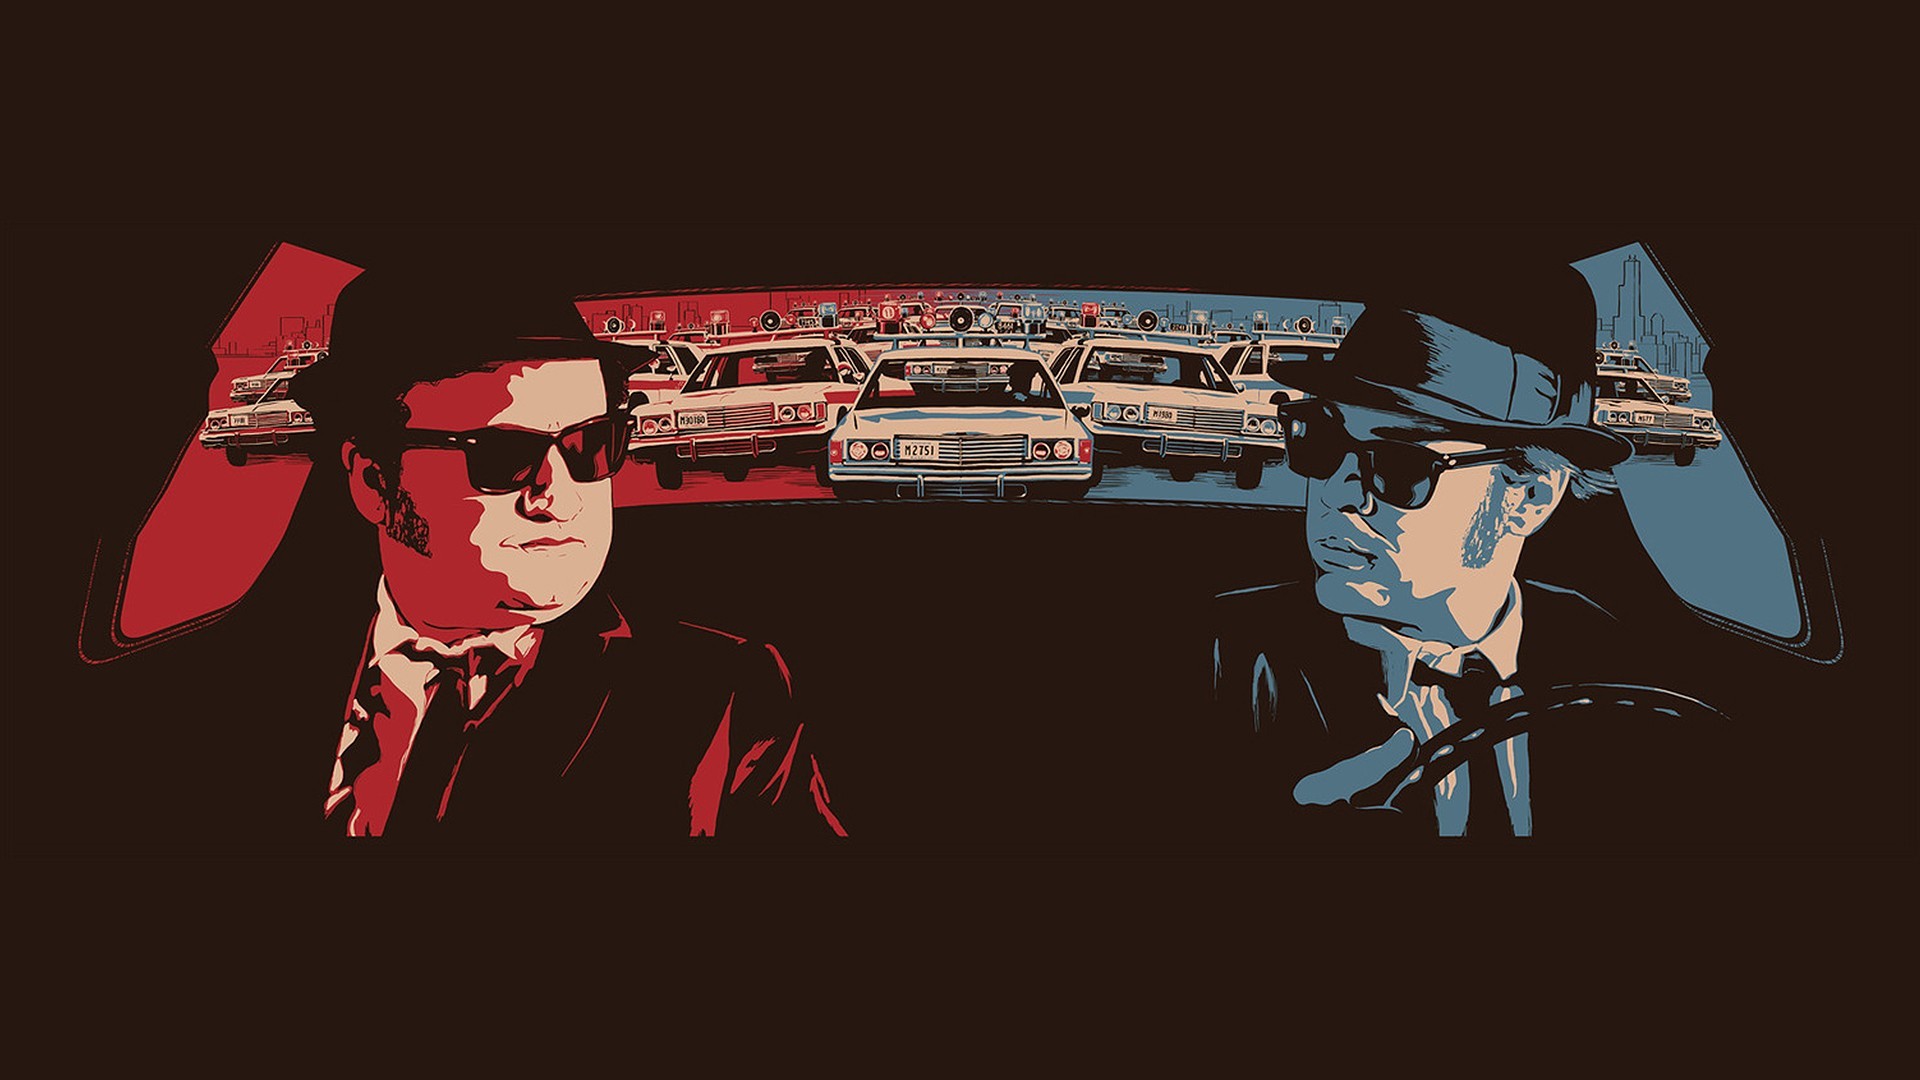 The Blues Brothers Wallpaper